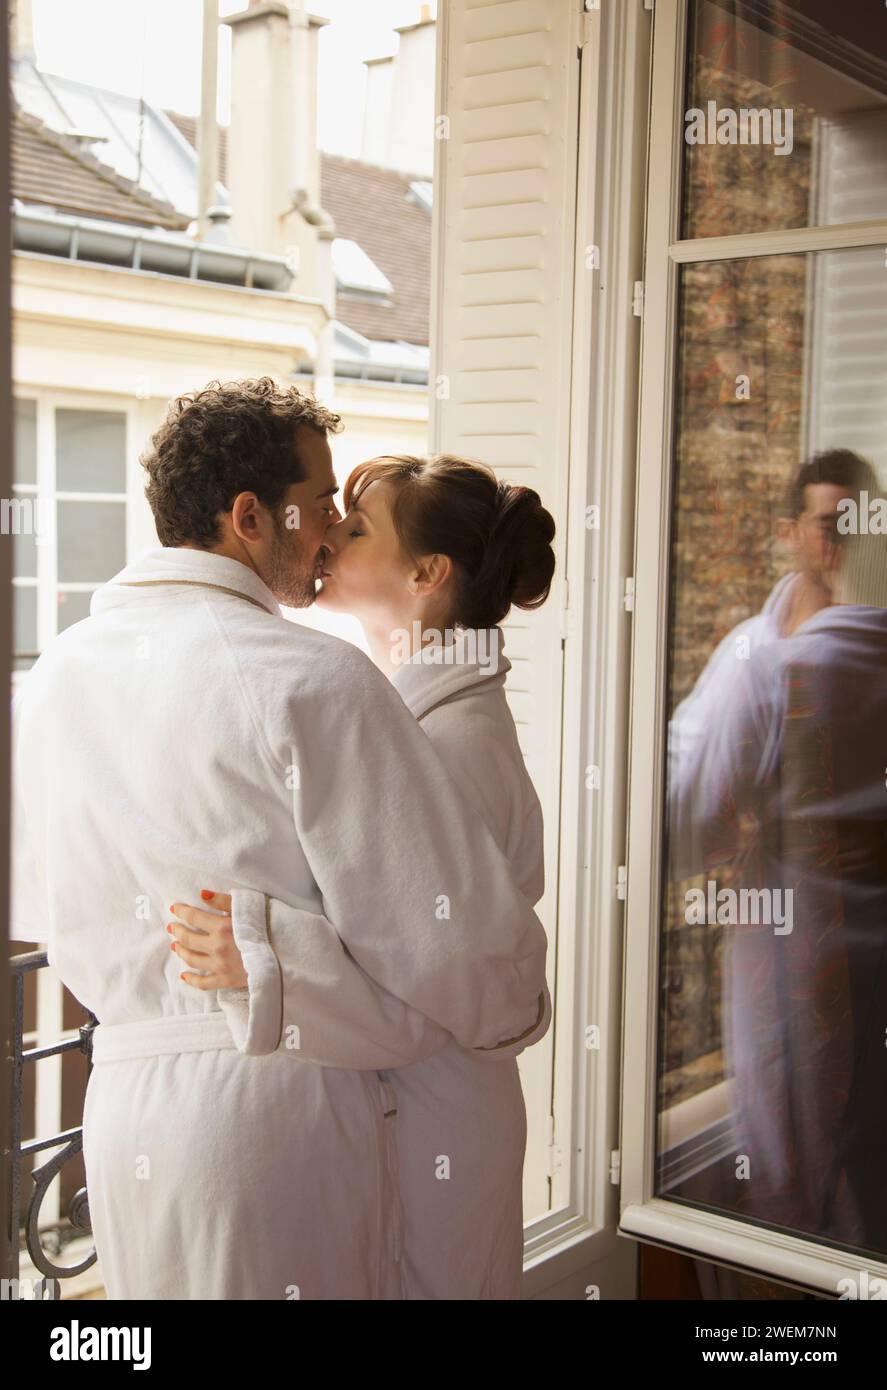 Couple kissing in front of an open window Stock Photo